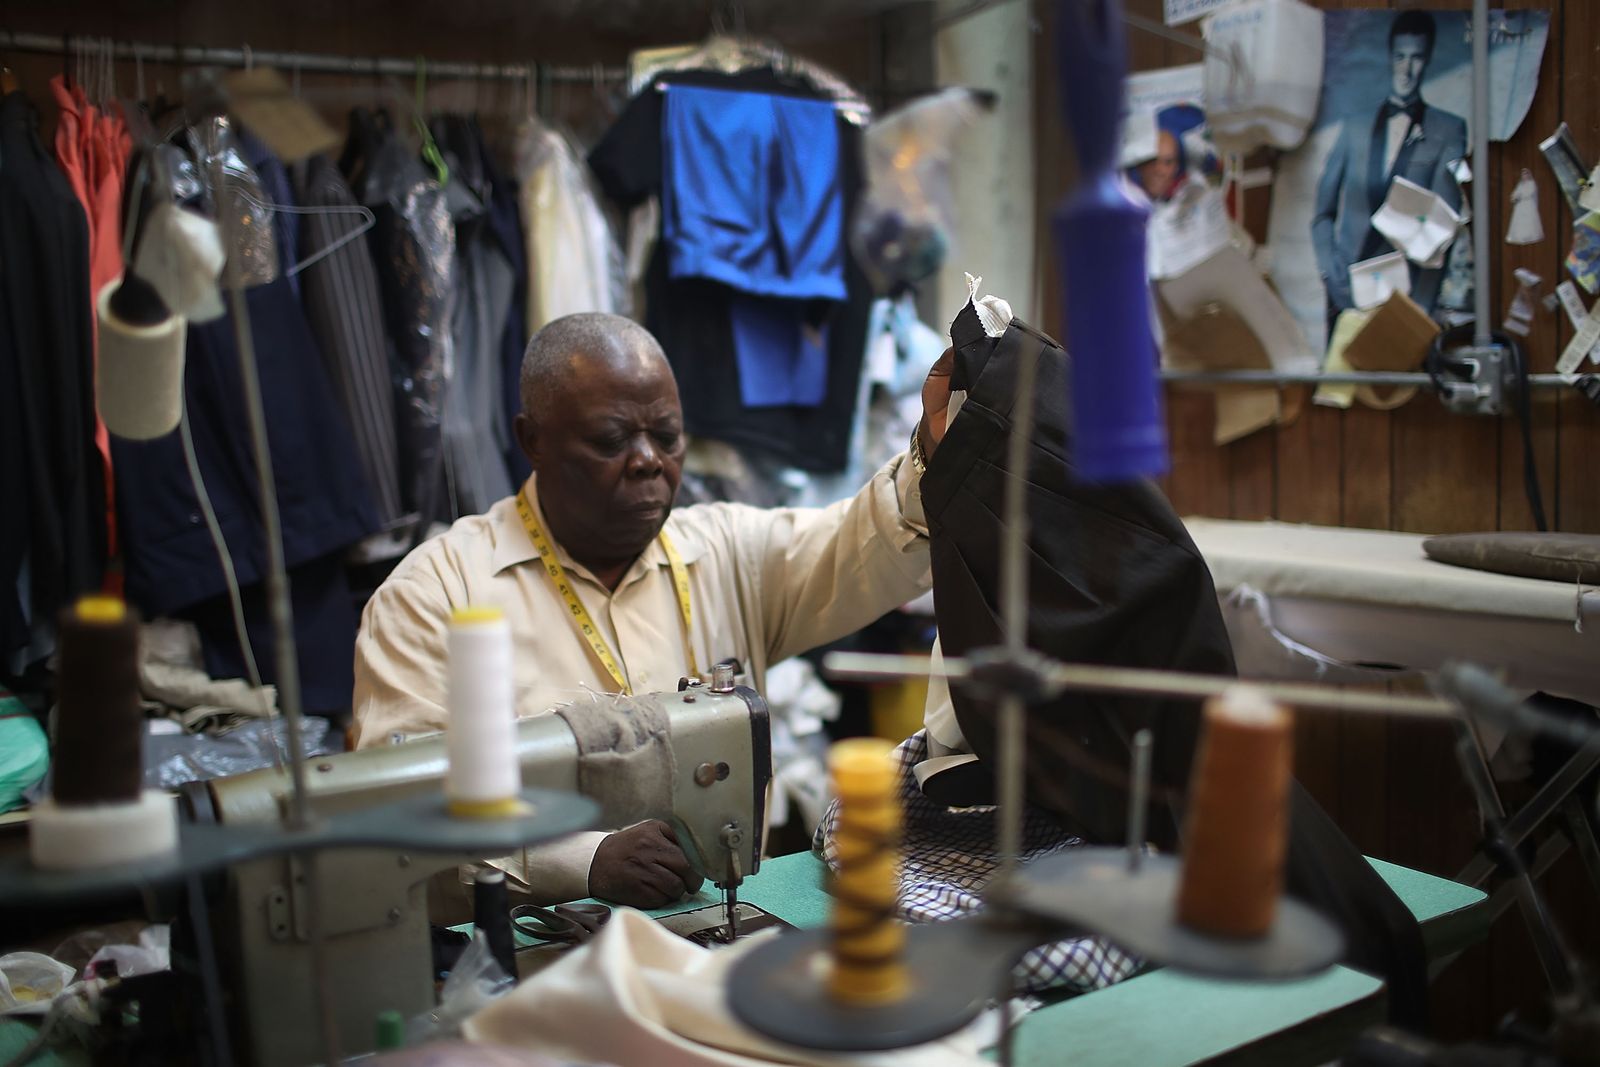 A man is sewing garments in a room surrounded by thread and apparel.